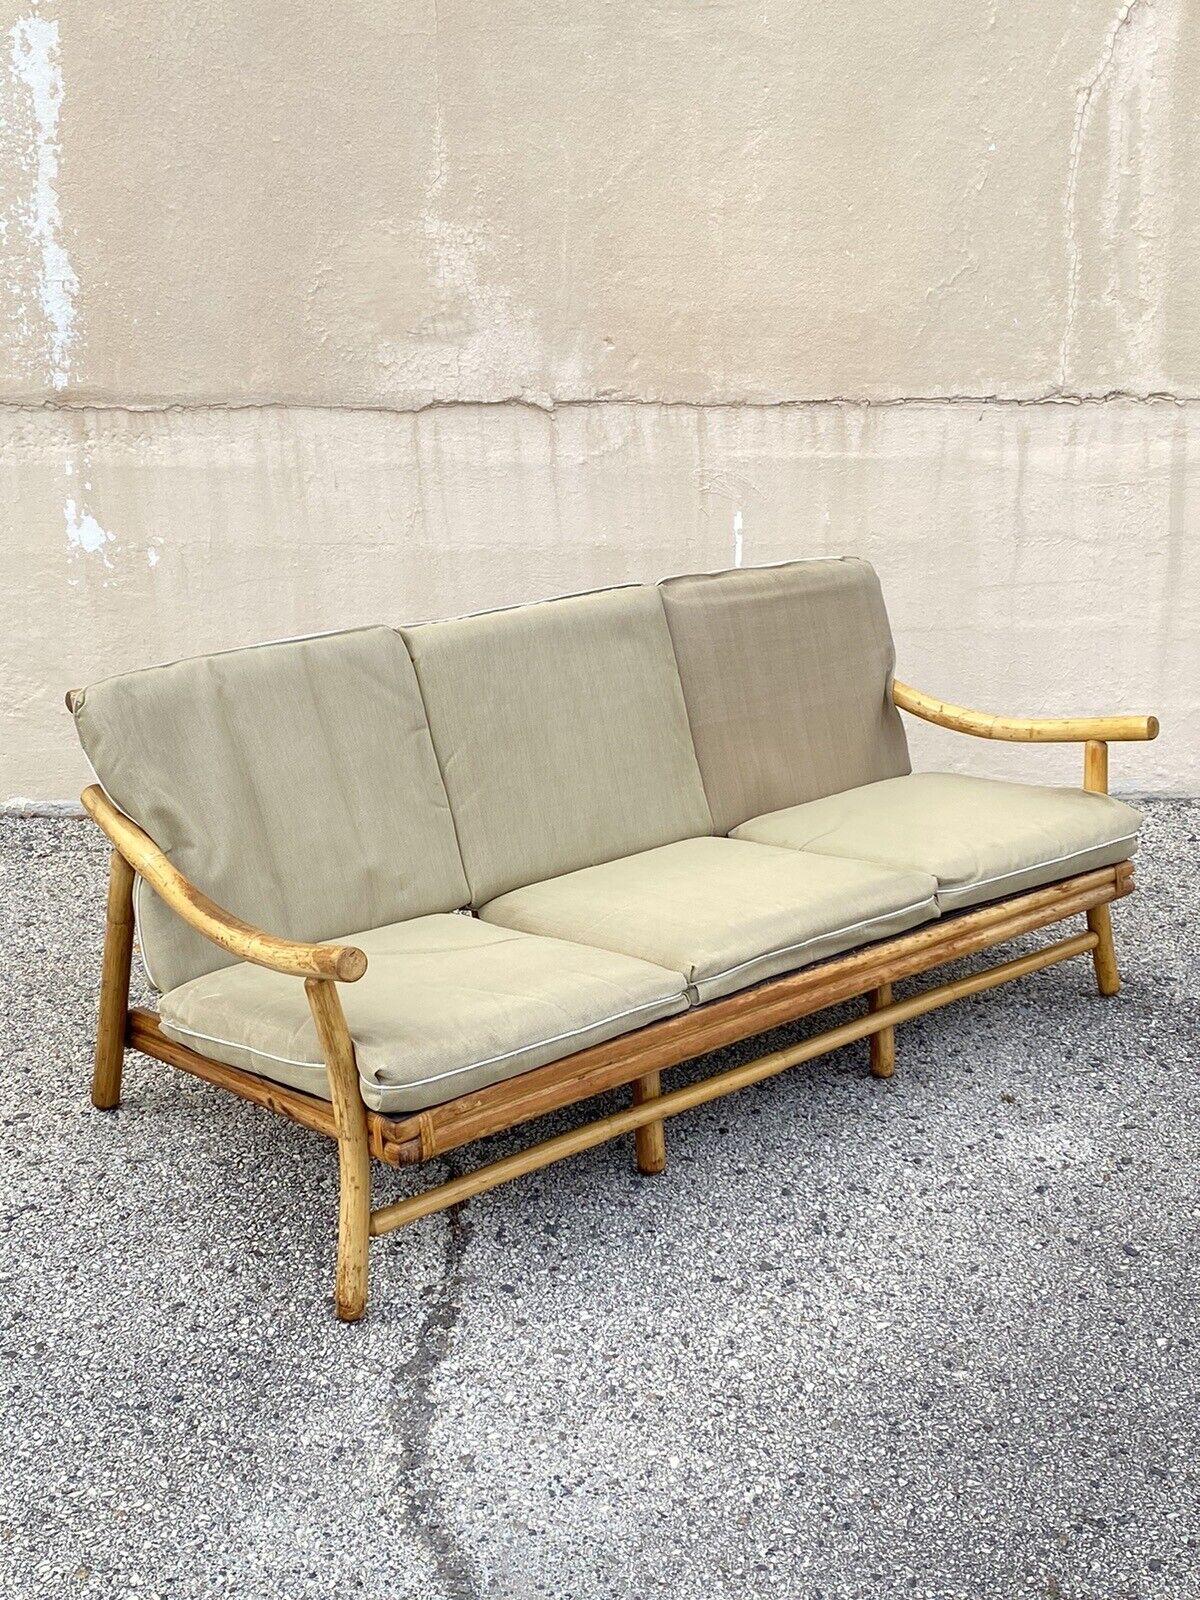 Hollywood Regency Vintage Ficks Reed Bamboo Rattan Tiki Sofa Set with Lounge Chairs - 3 Pc Set For Sale